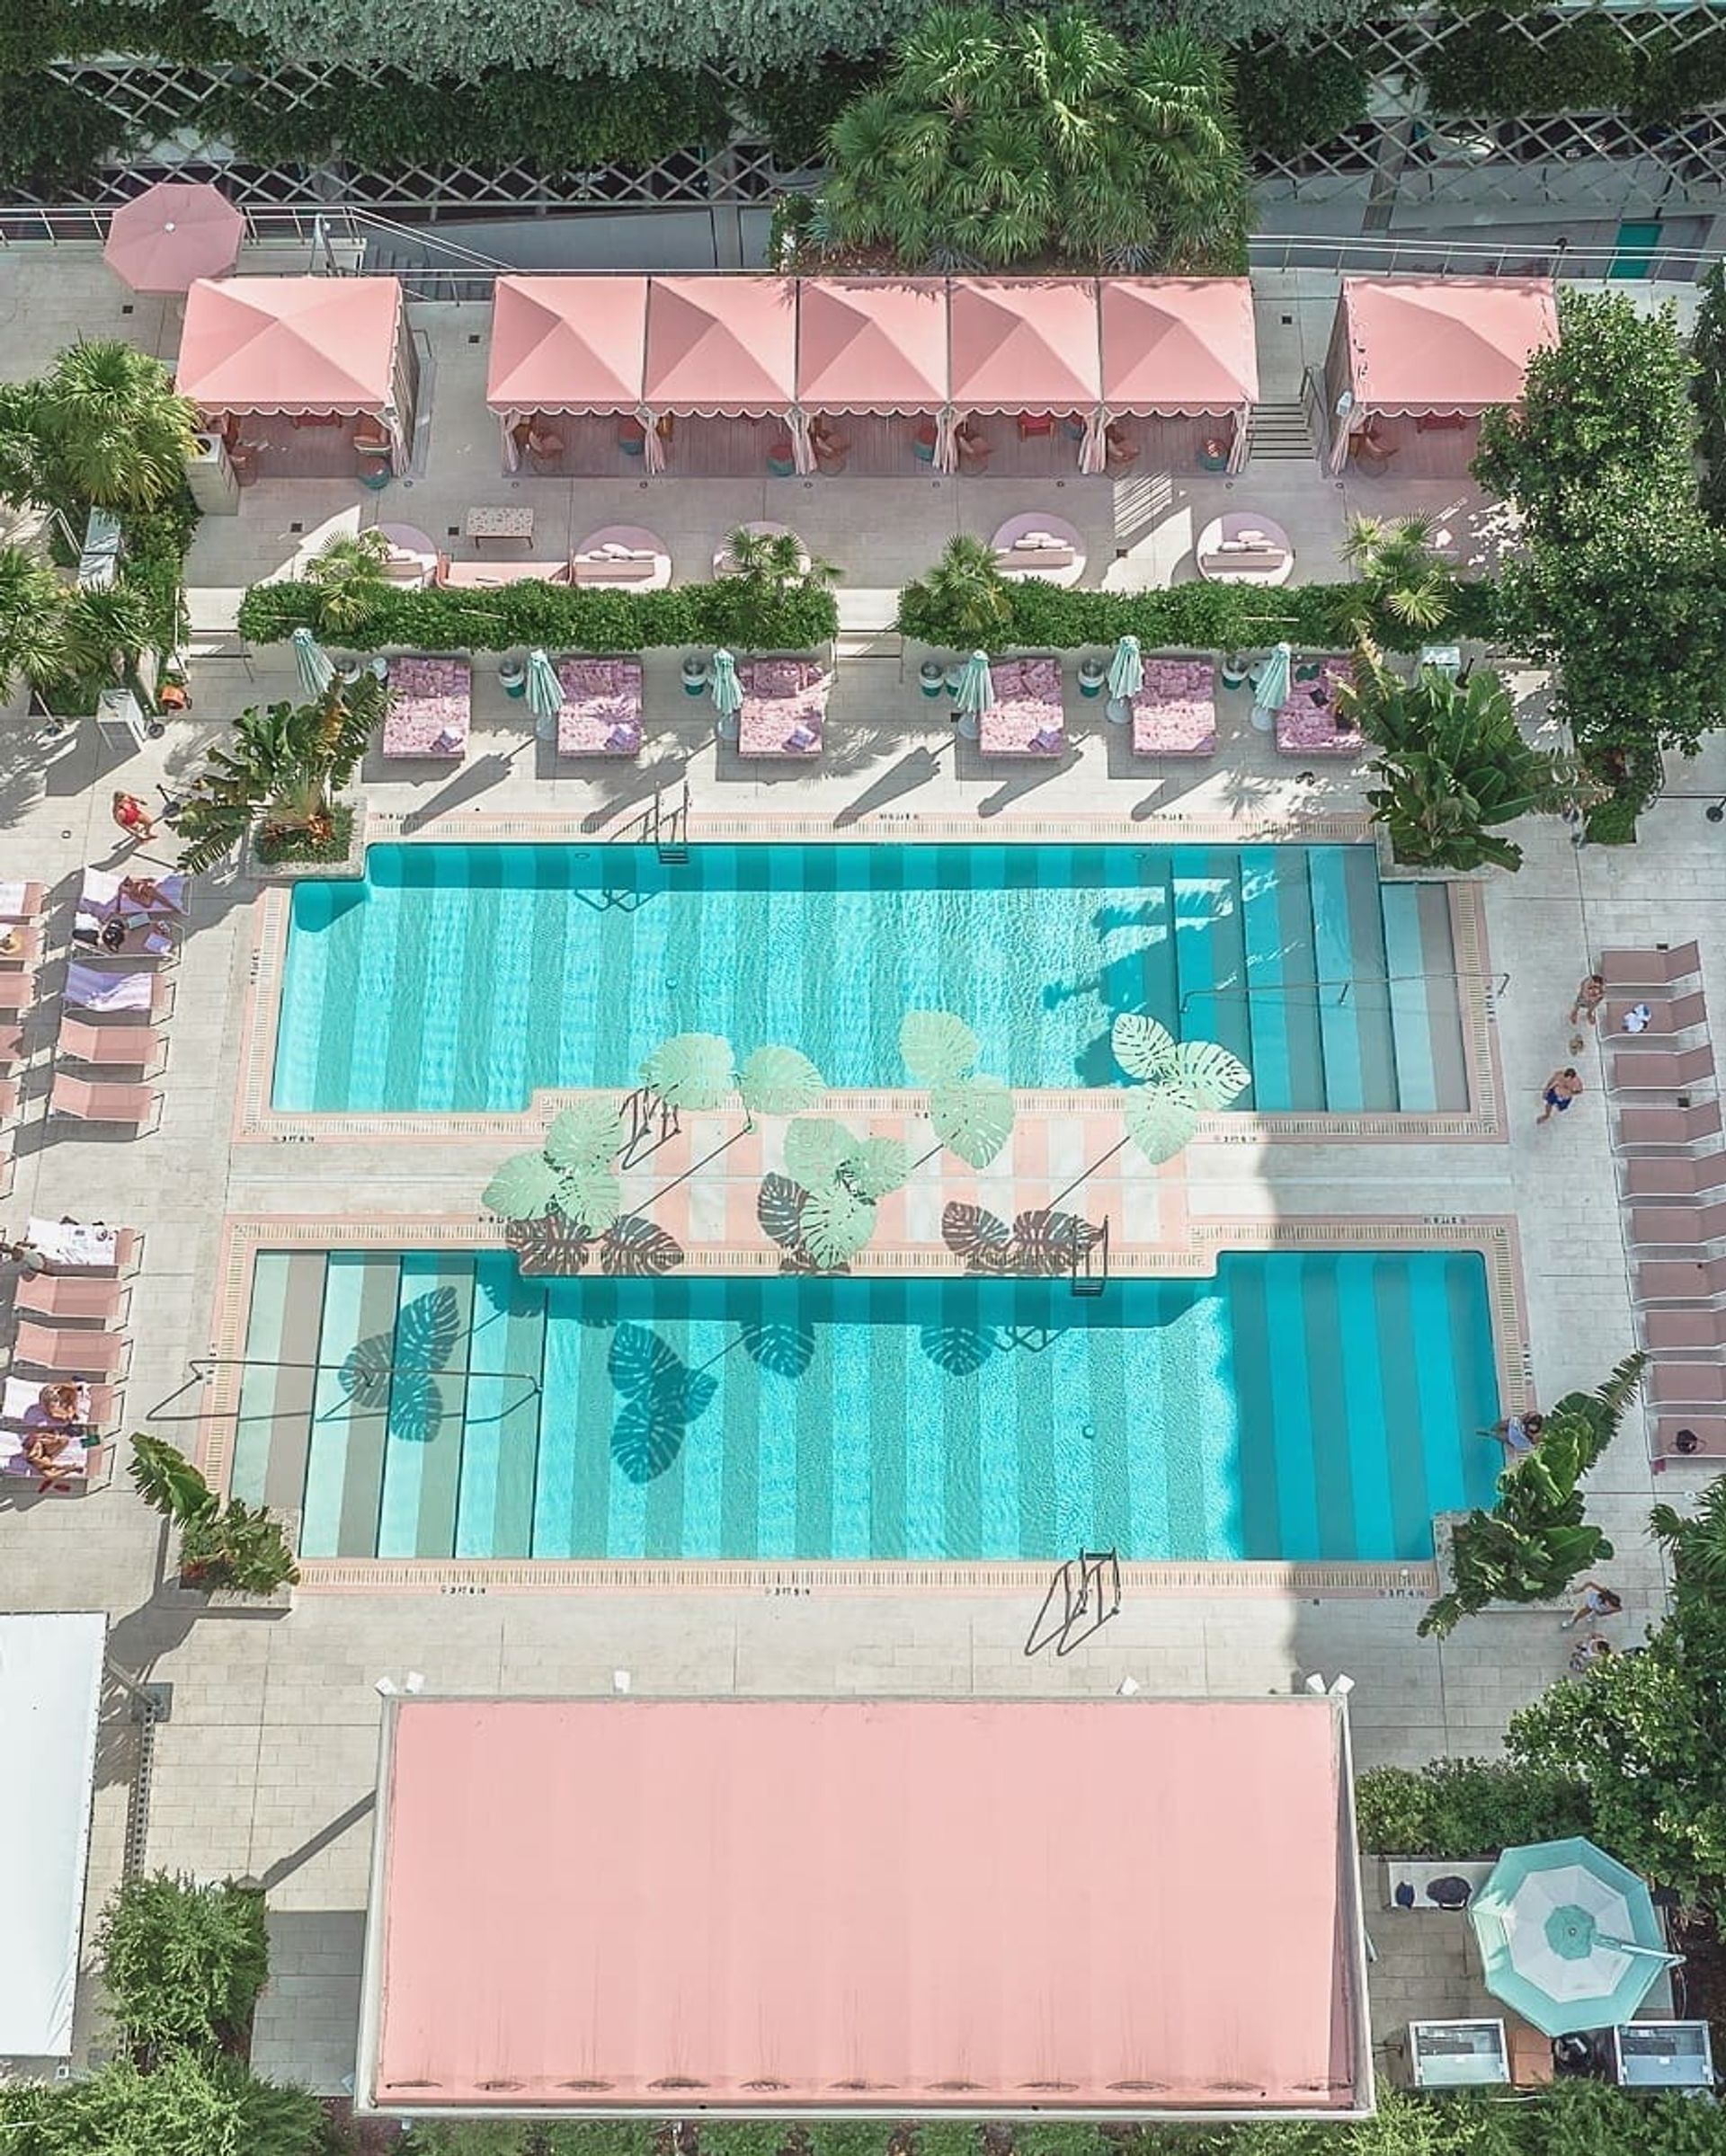 Epic Miami Cabana Pool Party at Strawberry Moon: Admission, Daybeds,  Cabanas, Bungalows & more